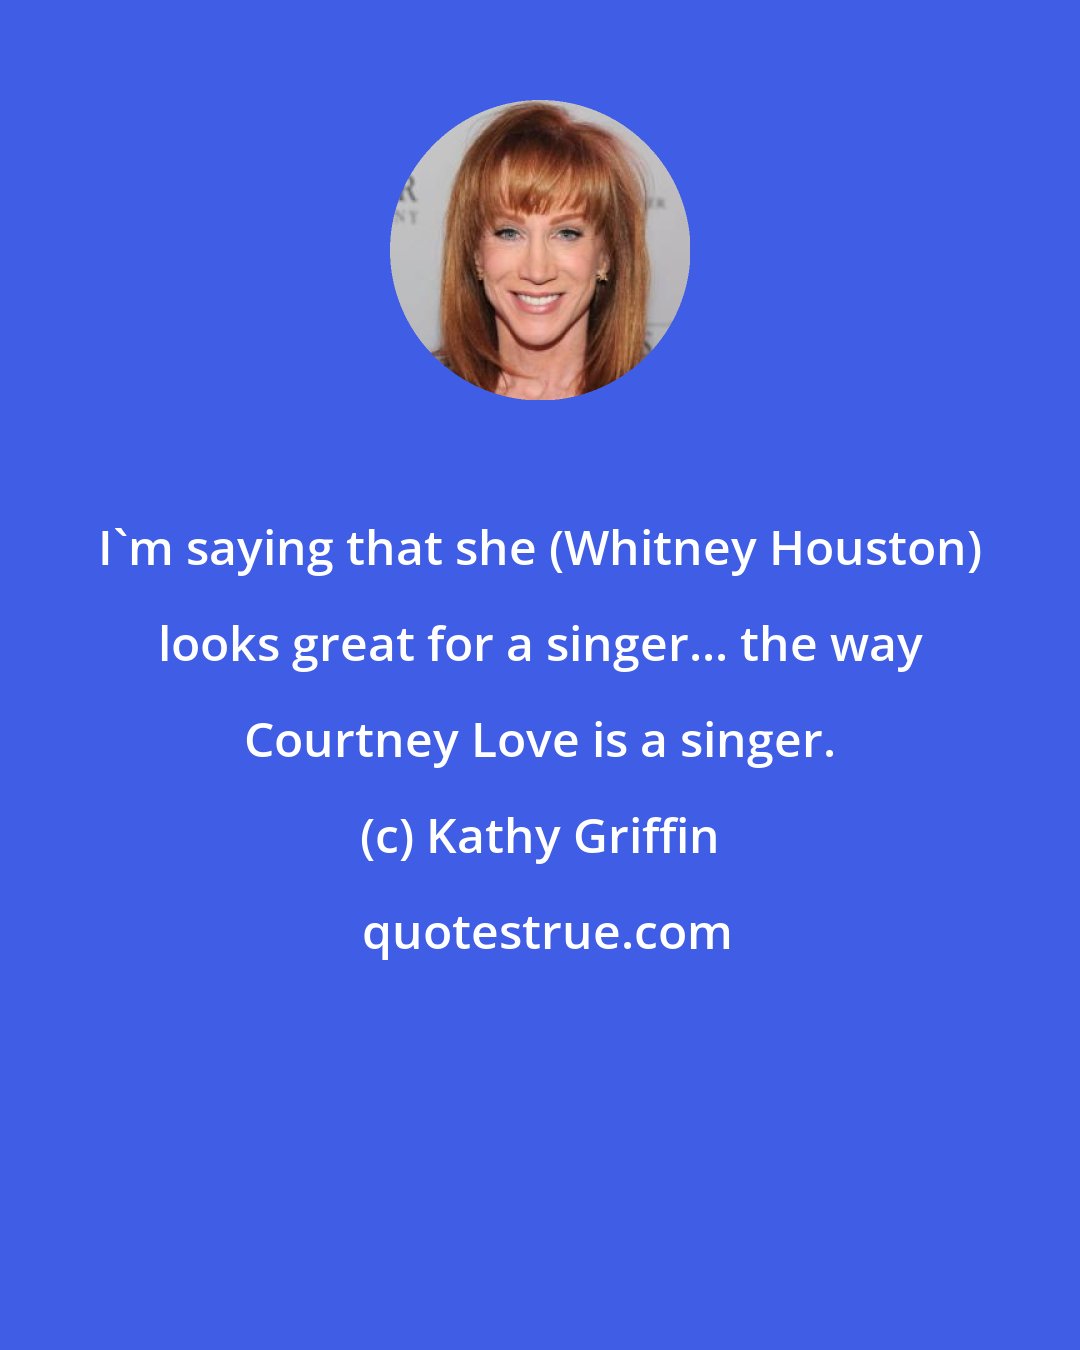 Kathy Griffin: I'm saying that she (Whitney Houston) looks great for a singer... the way Courtney Love is a singer.